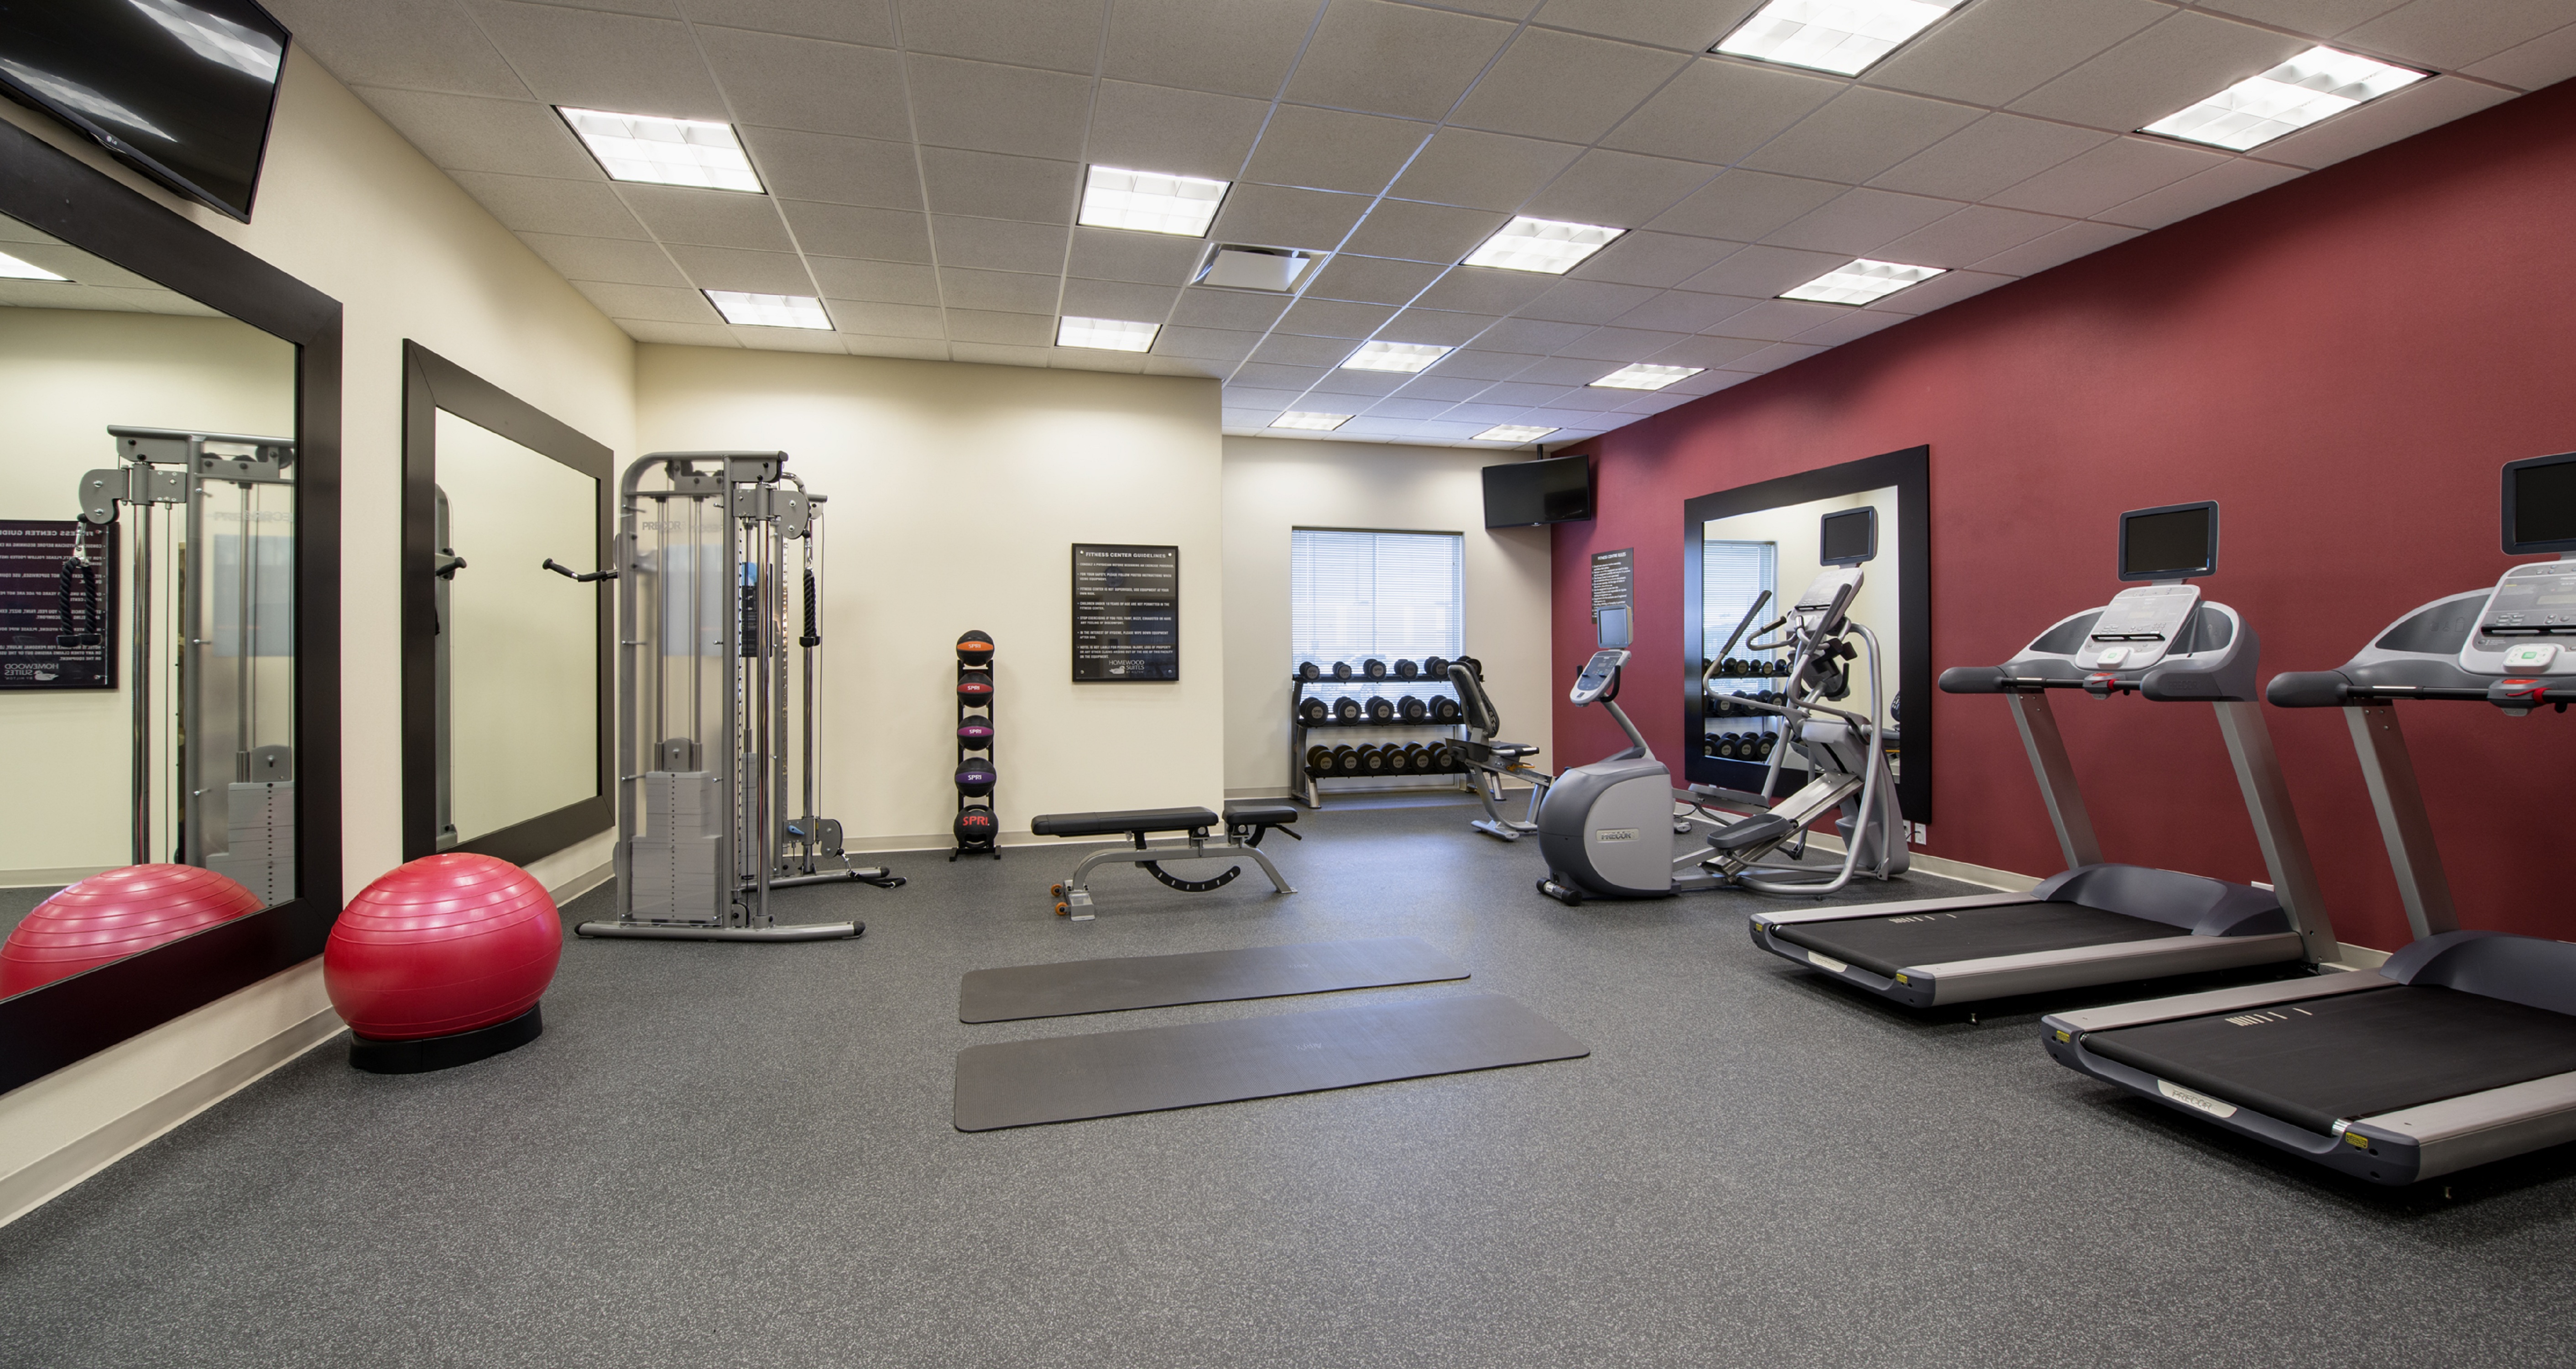  Fitness Center With Cardio Equipment, TV Above Large Mirrors, Red Exercise Ball, Weight Machine, Weight Balls, Weight  Bench, and TV Above Free Weights